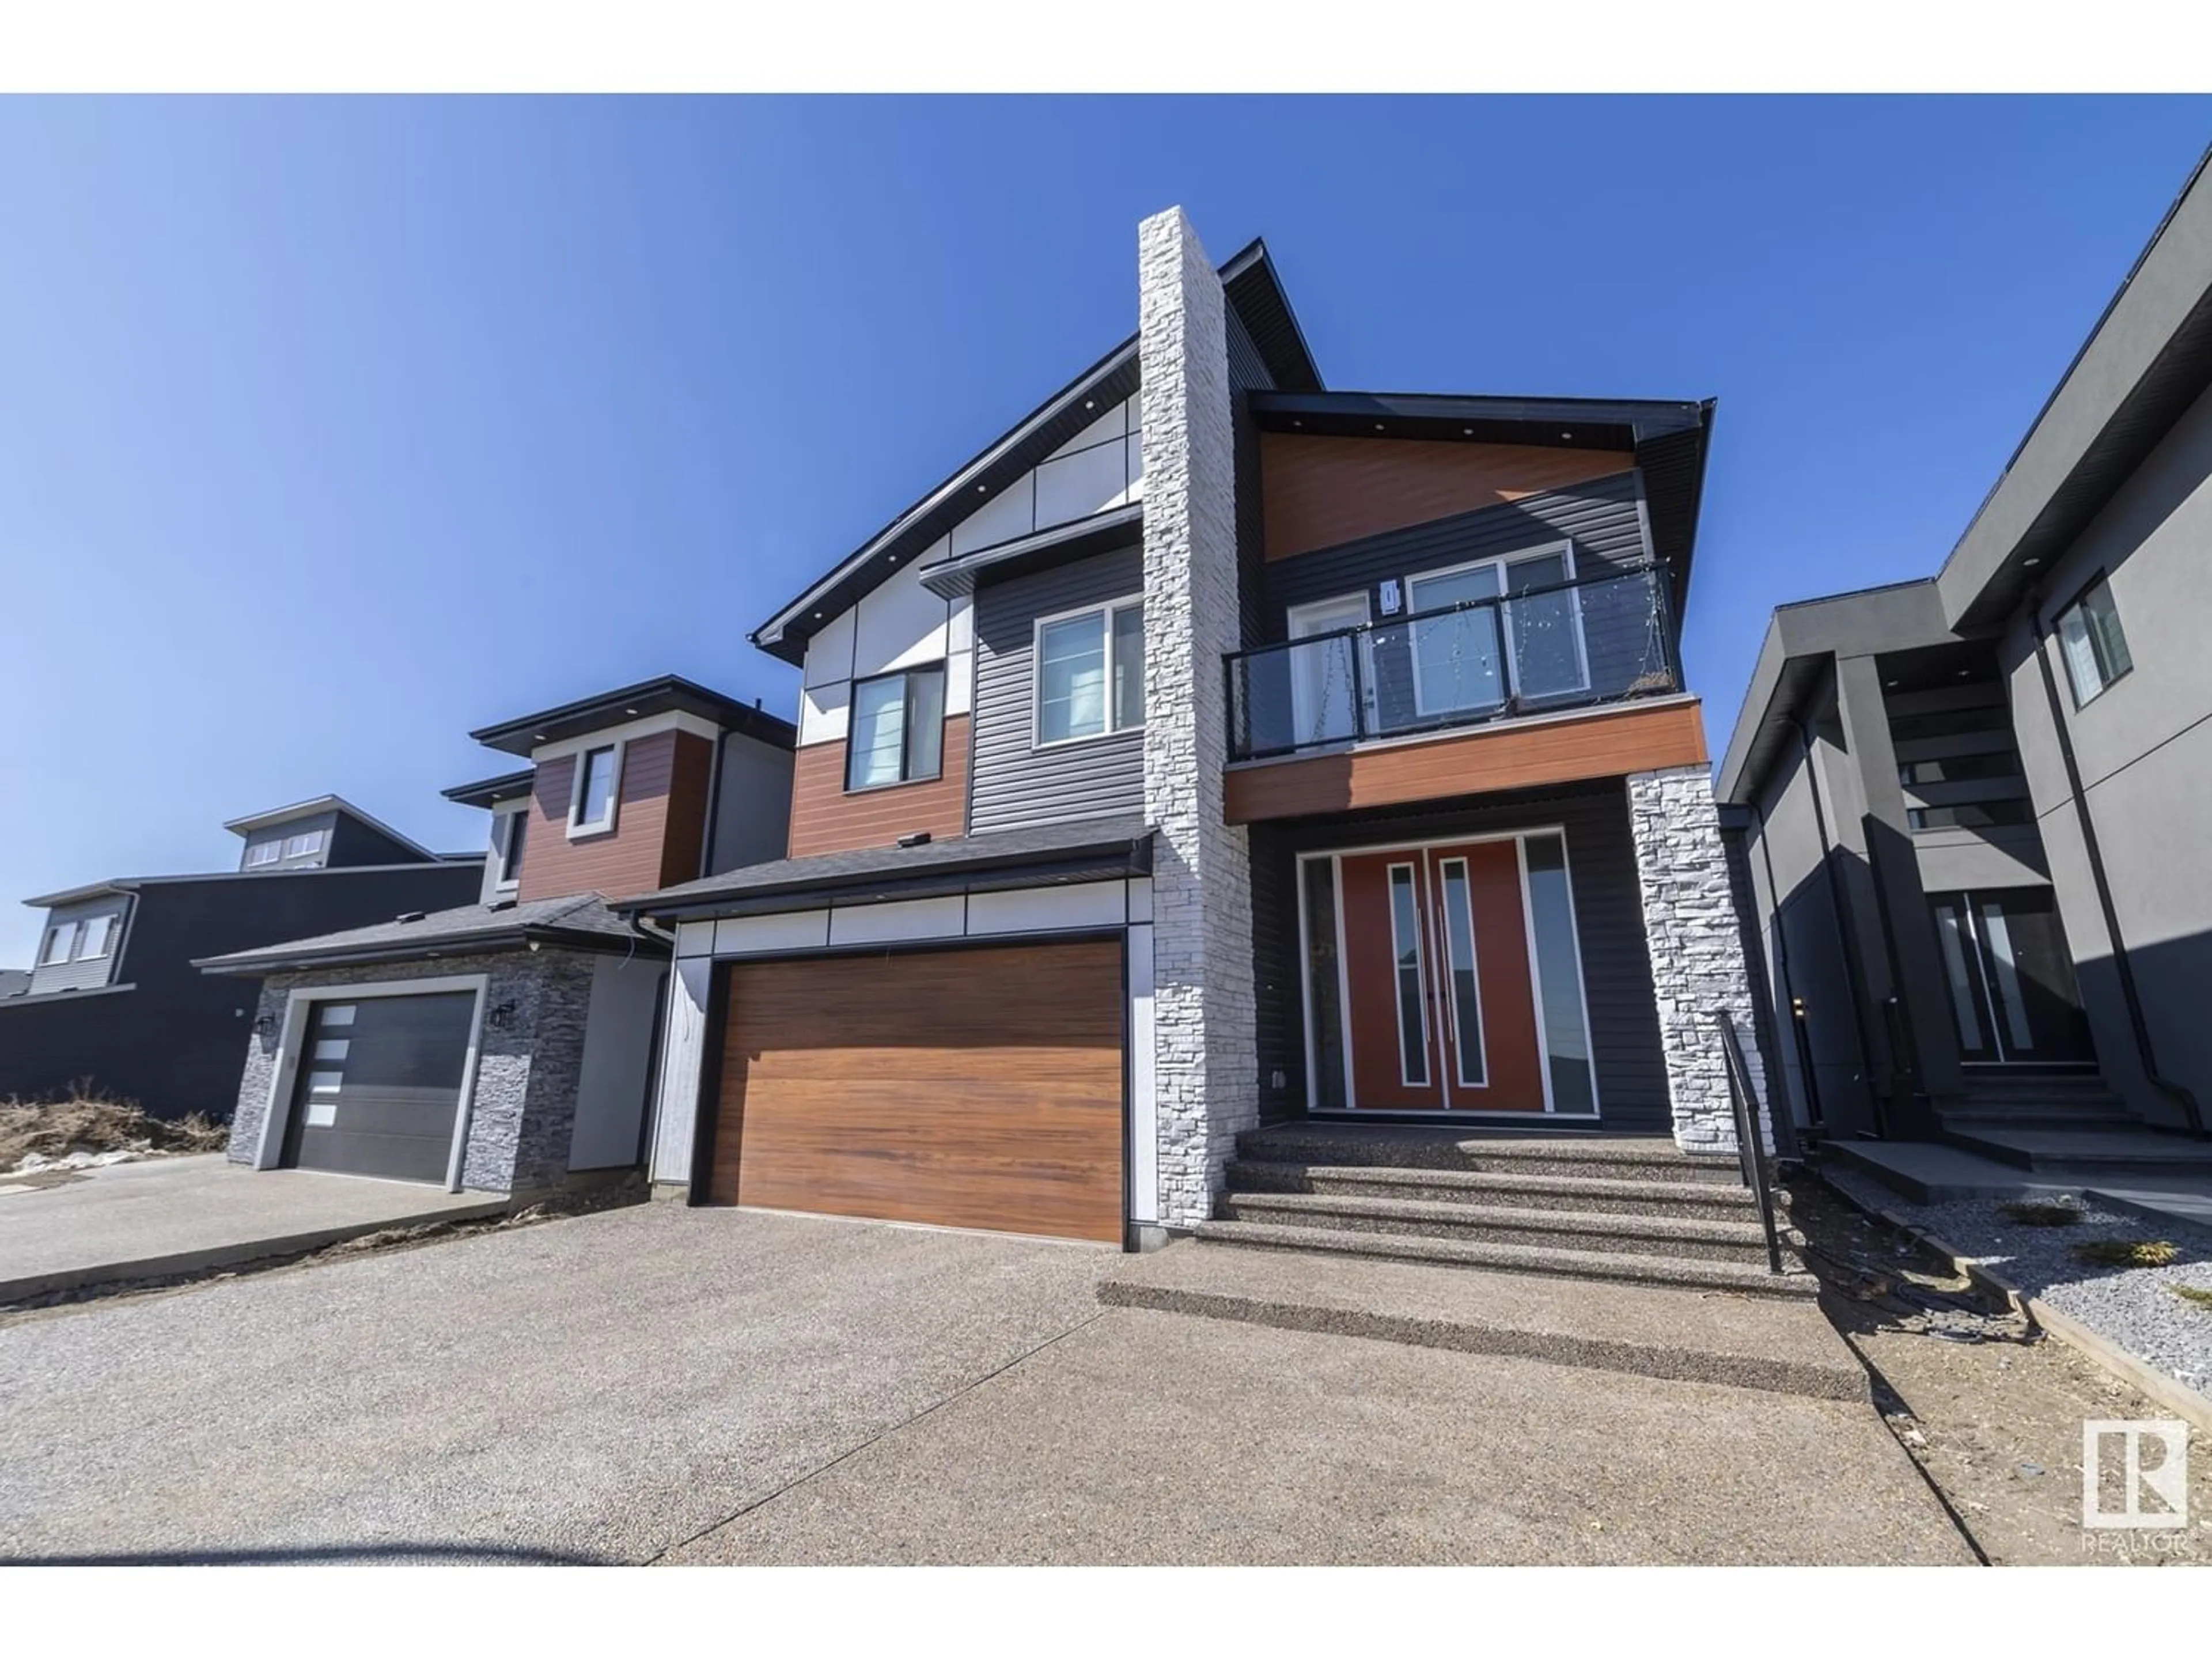 Frontside or backside of a home for 202 Fraser Way NW, Edmonton Alberta T5Y4C1